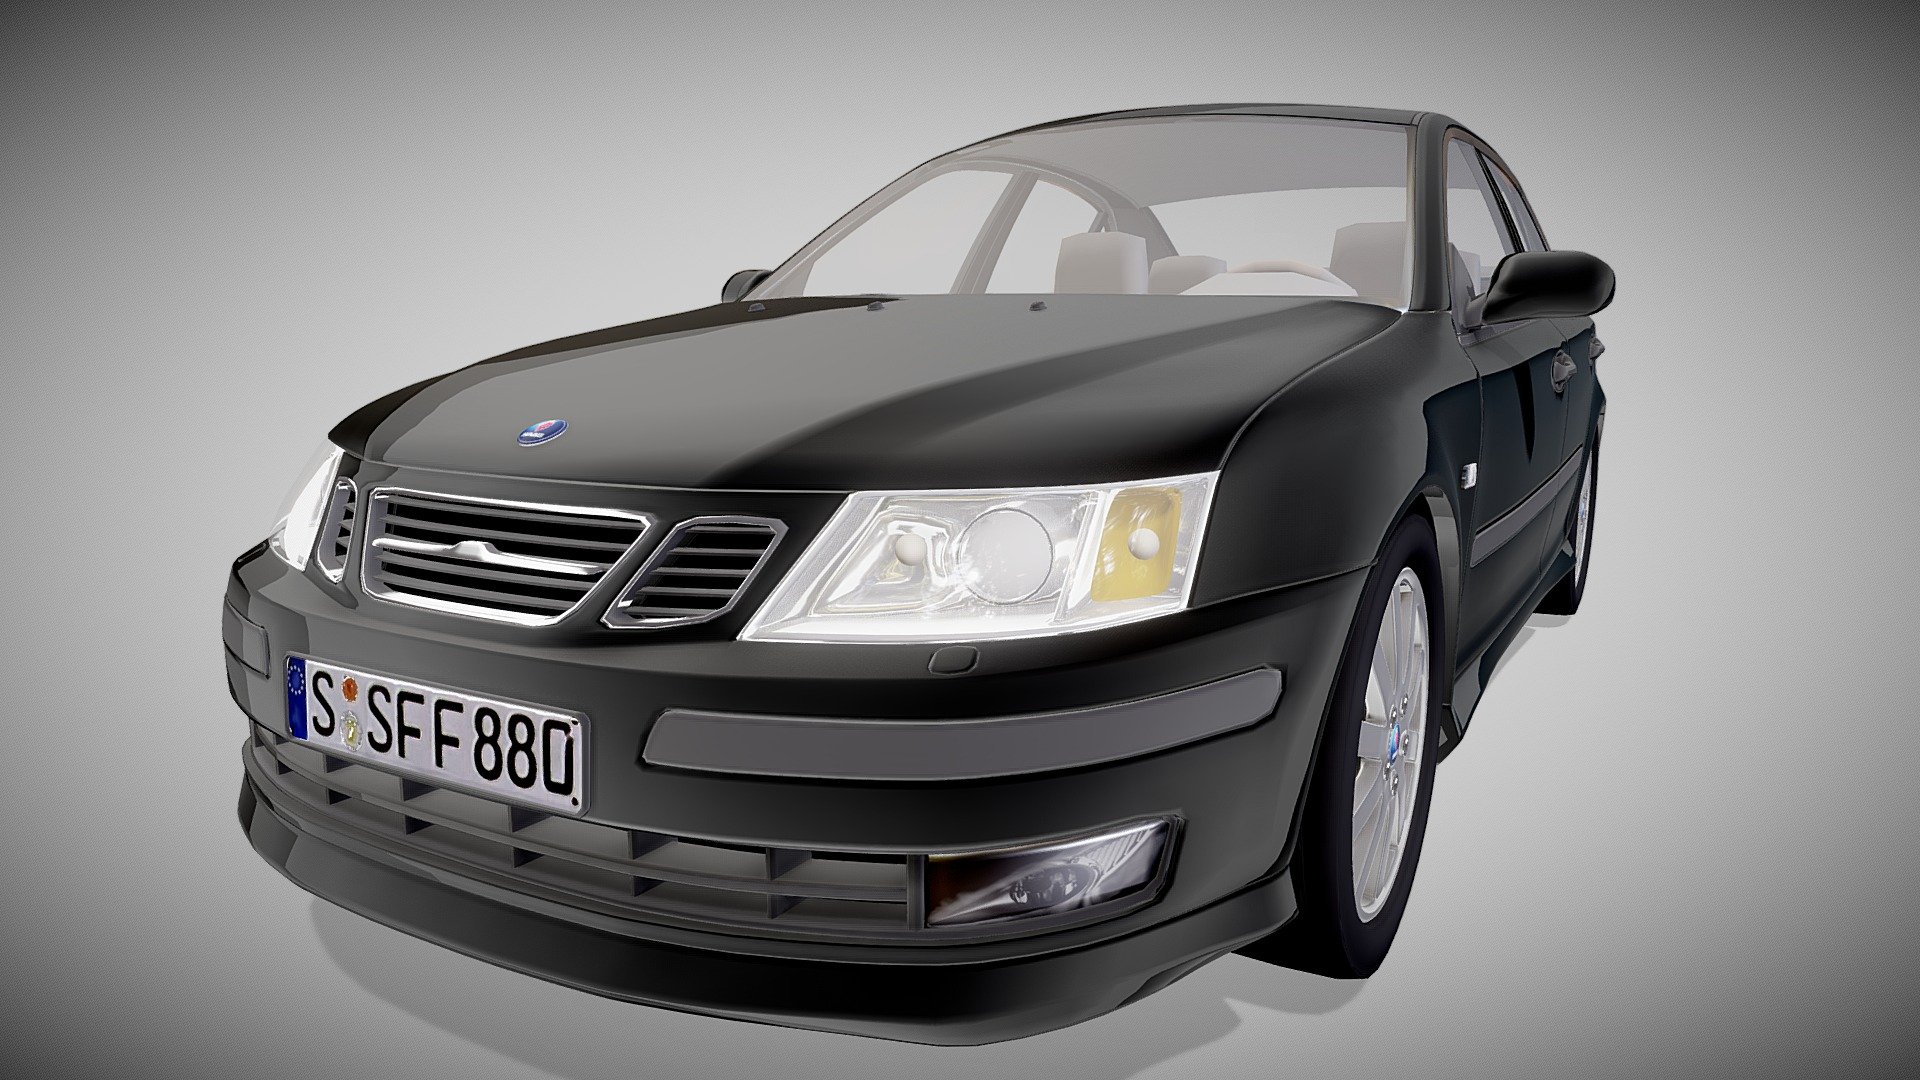 3D Model of the Saab 9-3 

In 2003 a brand new Saab 9-3 was launched. The car was well received and lauded for its good driving characteristics. New engine options were added, both with and without turbo.

The Saab 9-3 generation 2 is available with two “global” gasoline engines, a four-cylinder straight engine and a six-cylinder V engine . A proprietary fiber-optic electric/electronic system, the possibility of AWD (dubbed Saab XWD) are just a few of the features that are exclusive to the Saab 9-3.

The most drastic change from the former generation was the elimination of the hatchback design. The second-generation 9-3 is available as a four-door saloon, an estate (known as the SportWagon, SportCombi or Sport-Hatch dependant on the market), and a two-door convertible (introduced in 2004).

In the 2006 model year the 9-3 Sport Wagon was introduced together with the 6-cylinder B284 engine with variable intake camshaft phasing (CVCP) and a twin scroll turbocharger 3d model